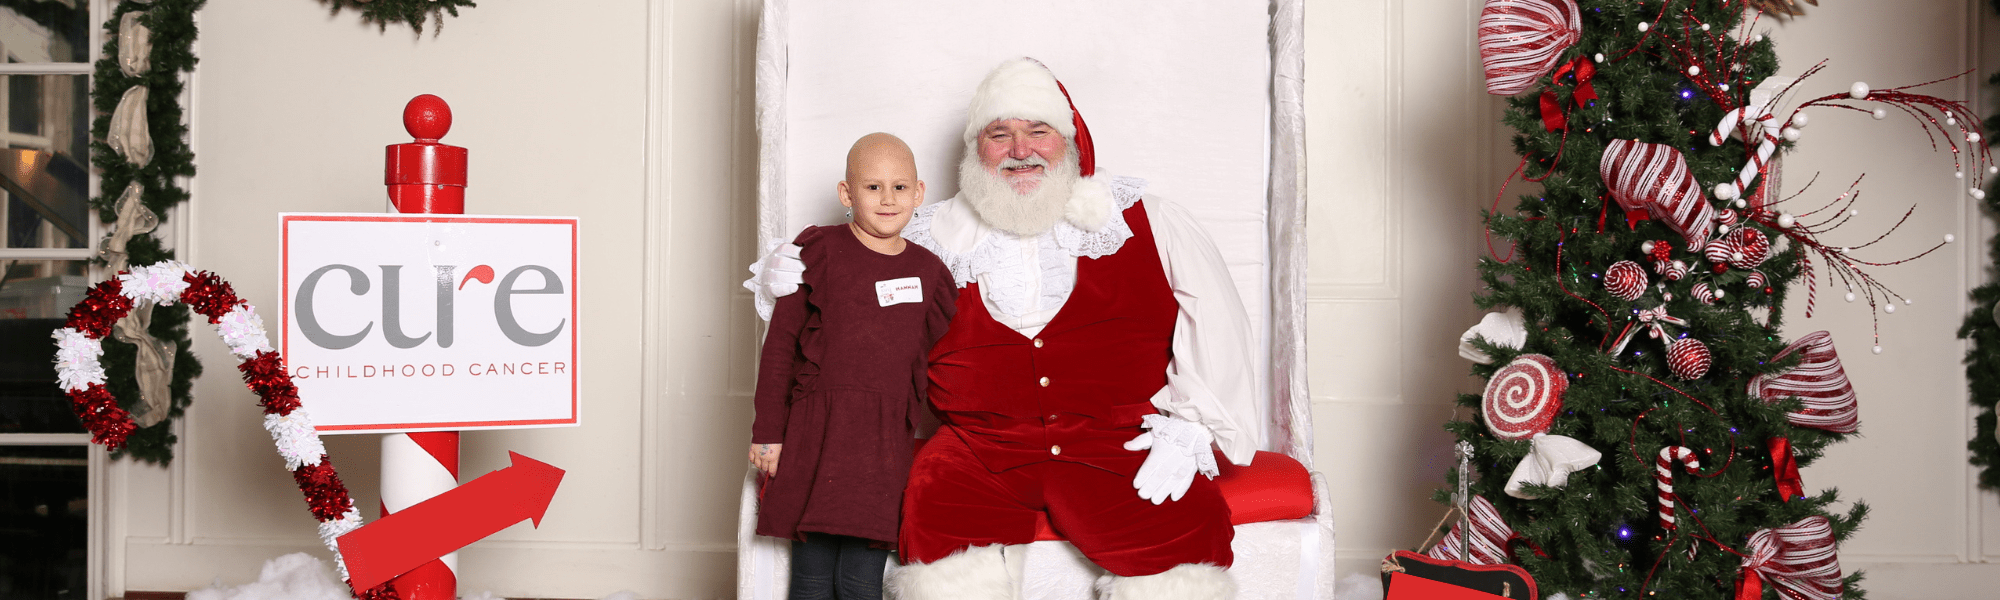 10 Ways to Help Children Fighting Cancer During the Holidays